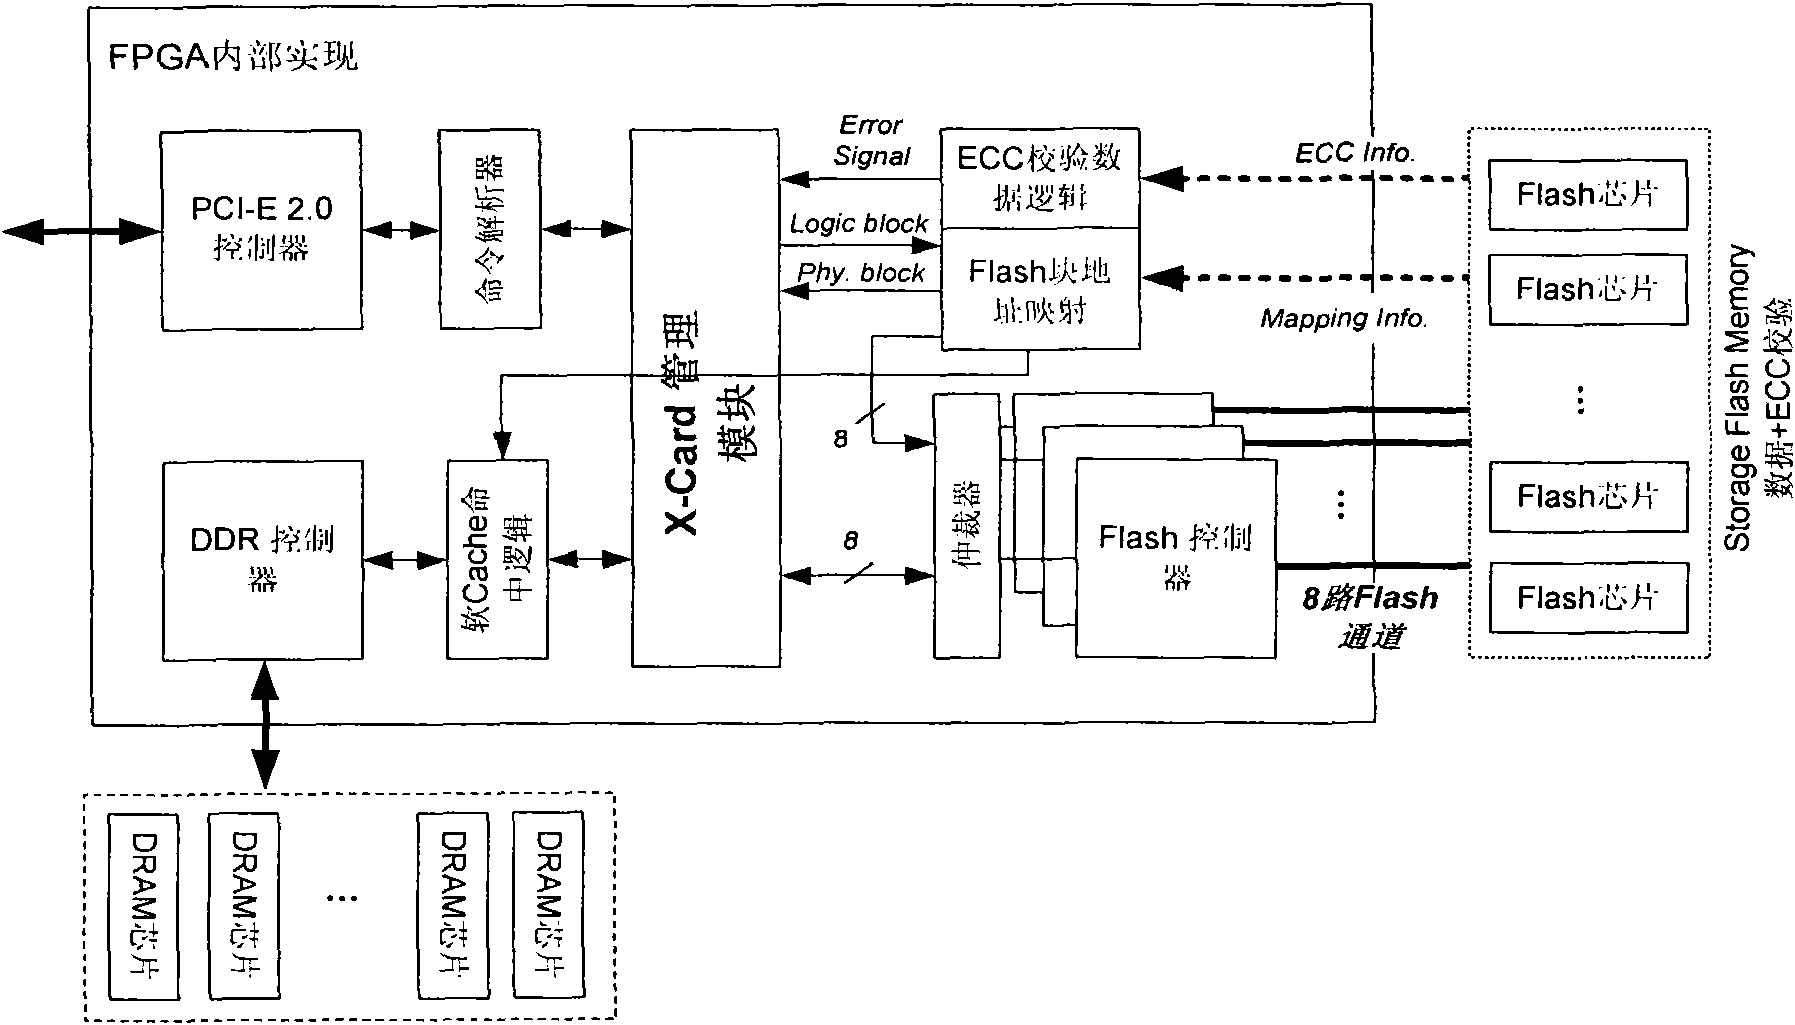 Flash based PCIE (peripheral component interface express) board for data storage